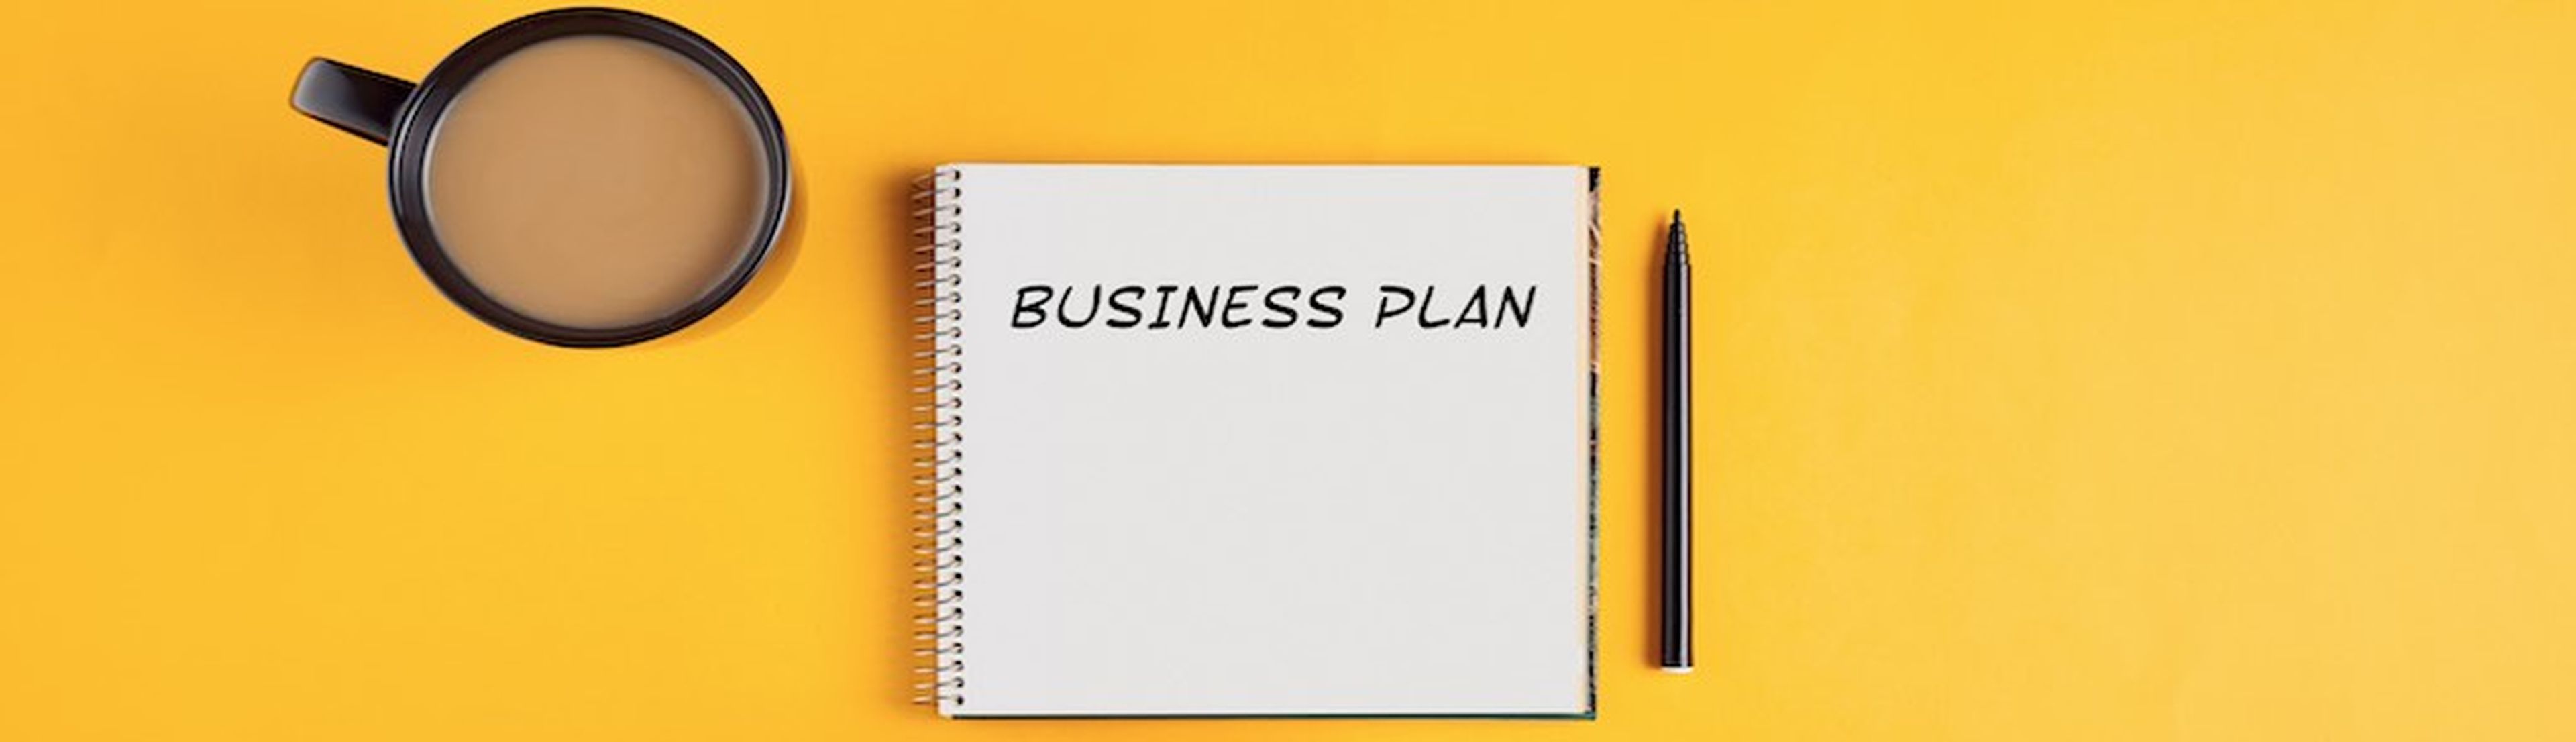 Hands of a businessman with spiral notebook with business plan ideas ready to be written in it. Yellow background with copy space.